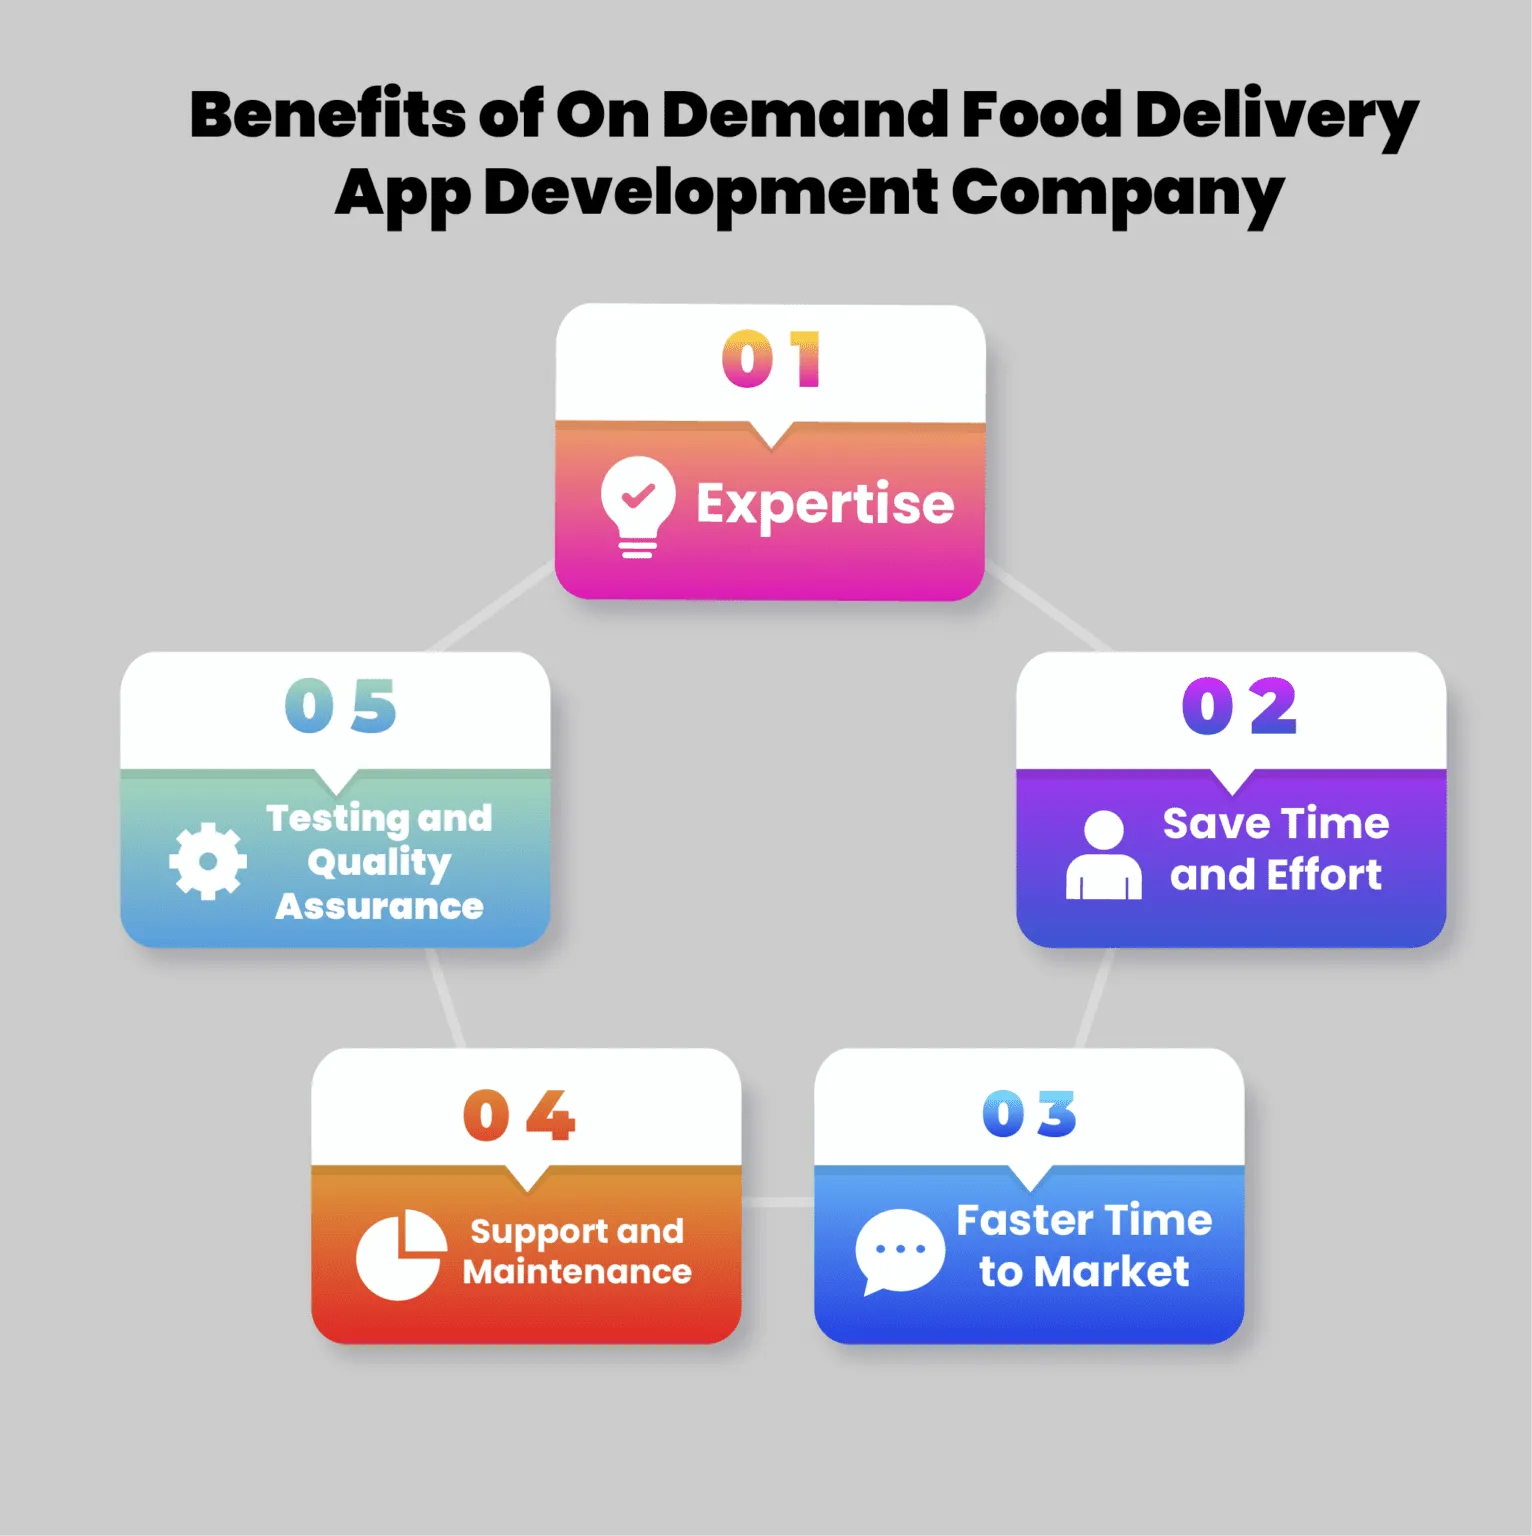 Benefits of On Demand Food Delivery App Development Company
